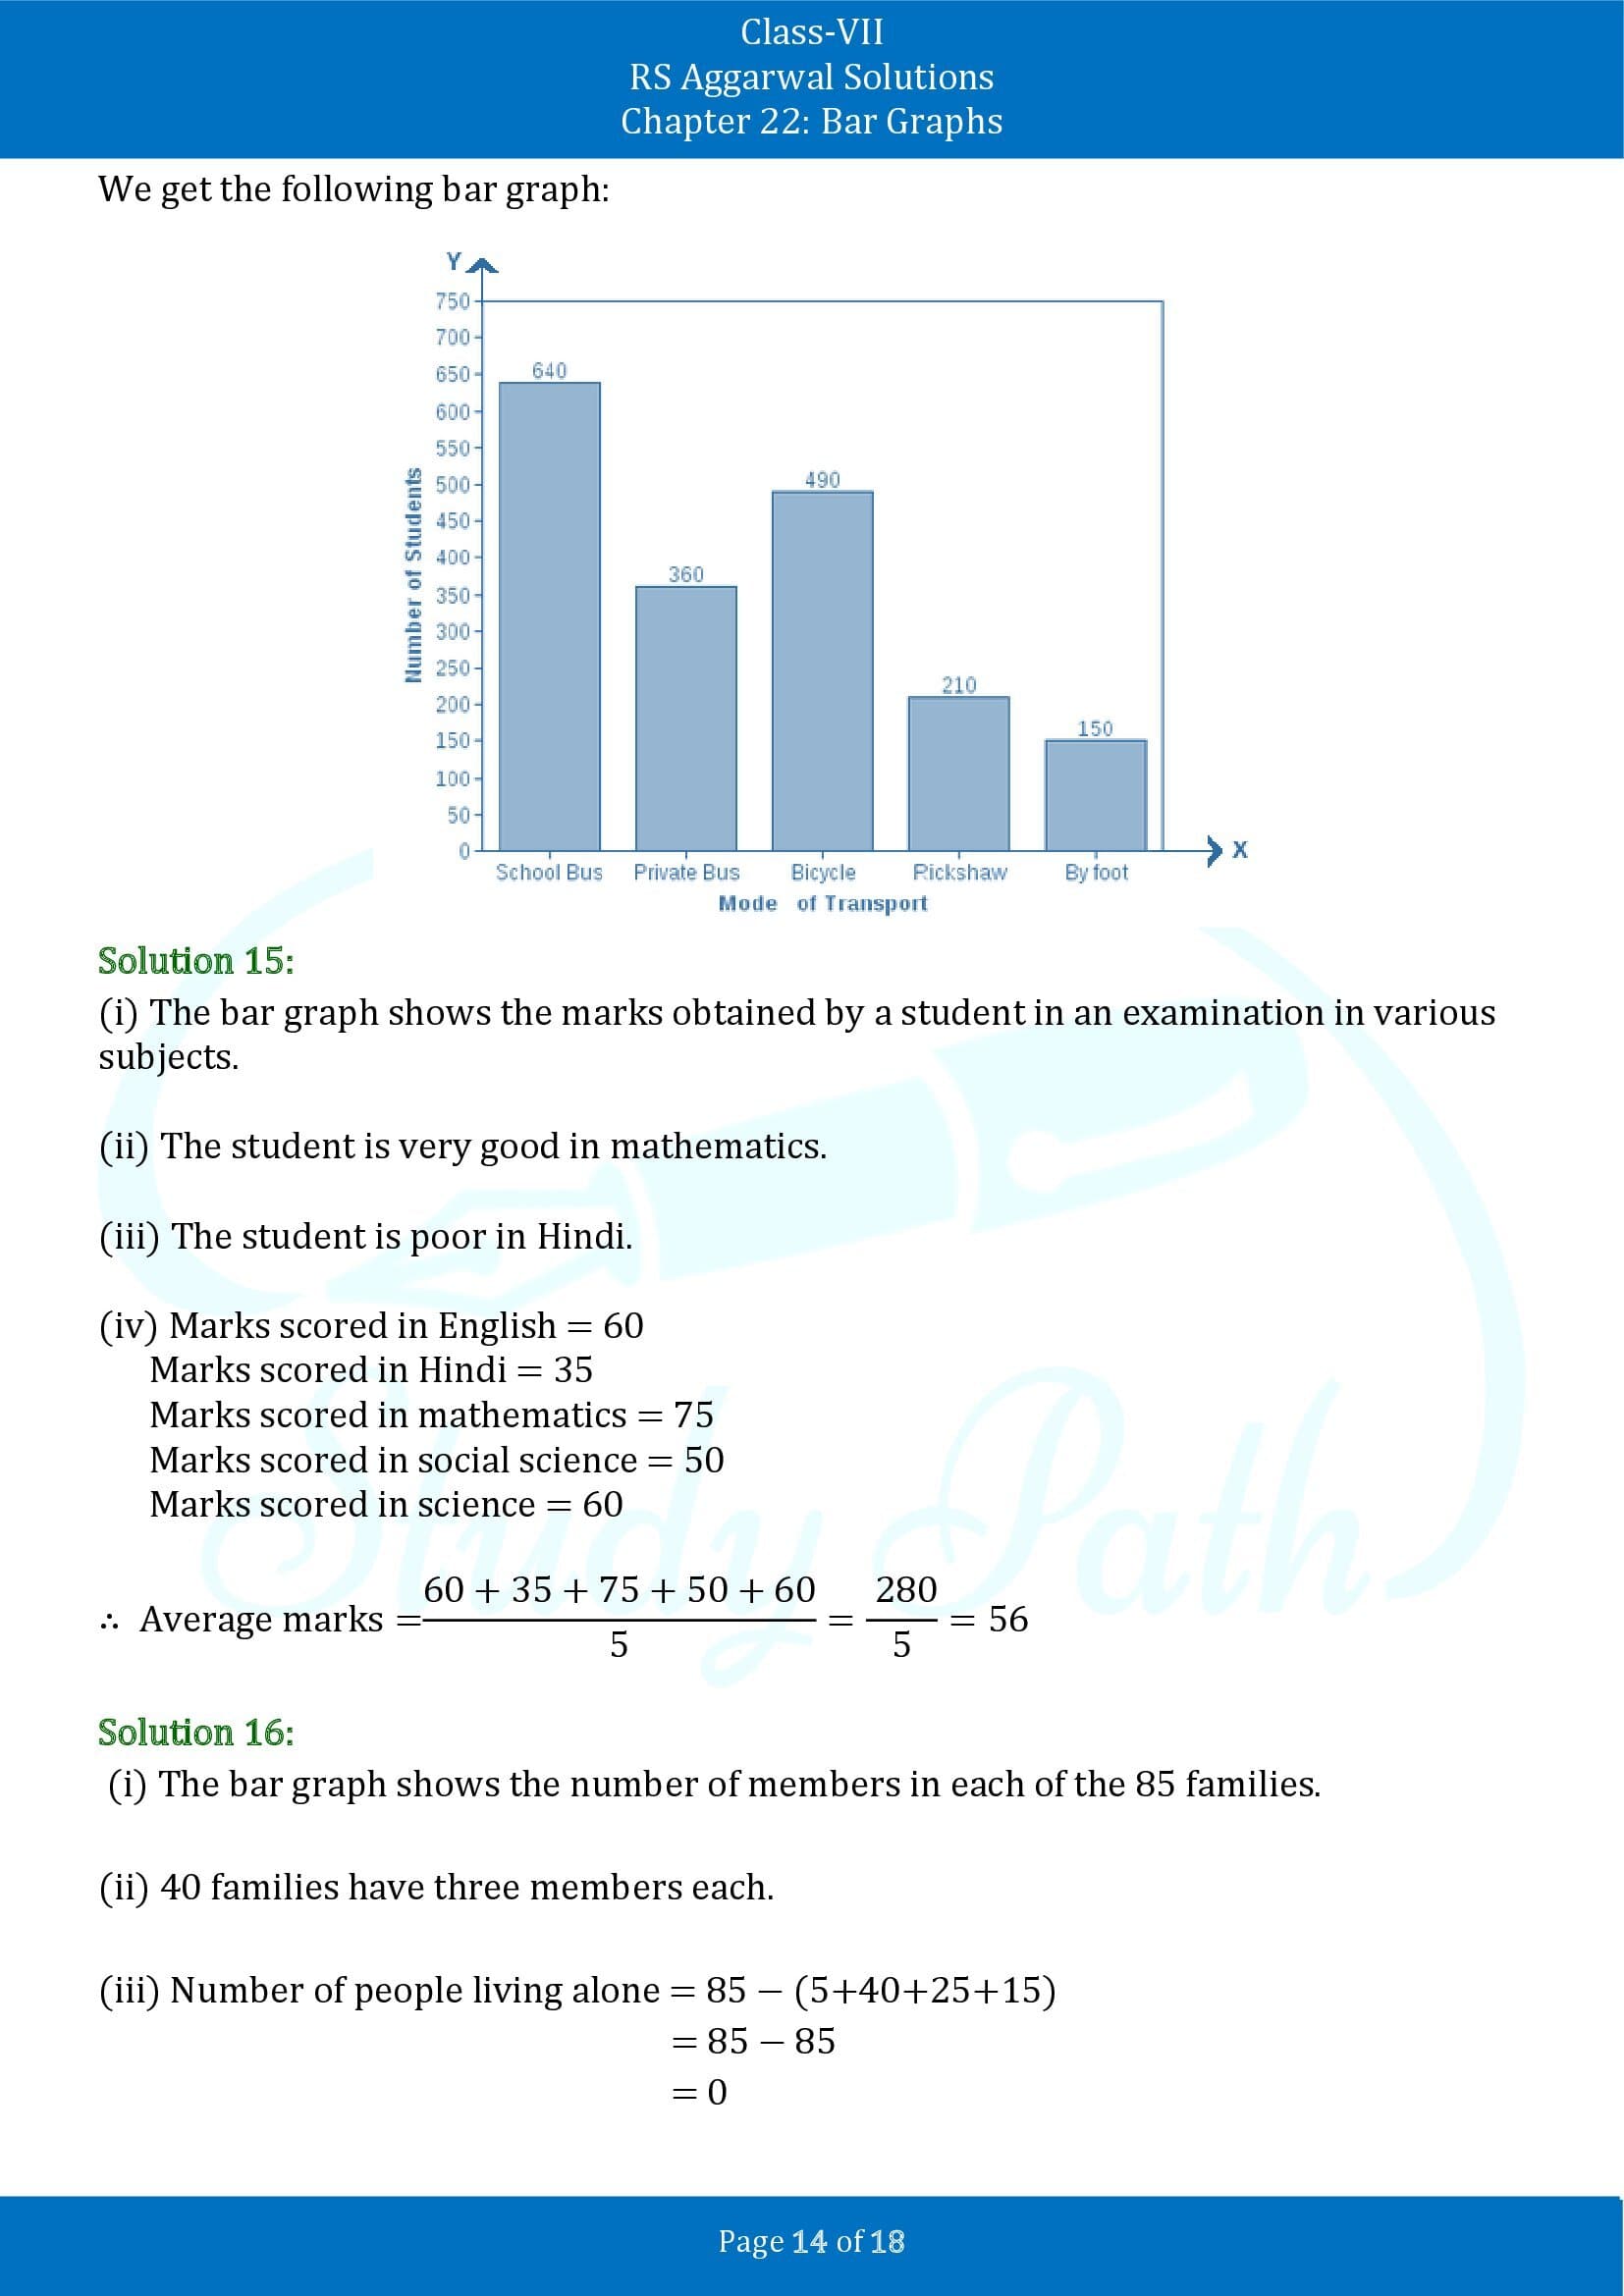 RS Aggarwal Solutions Class 7 Chapter 22 Bar Graphs 00014